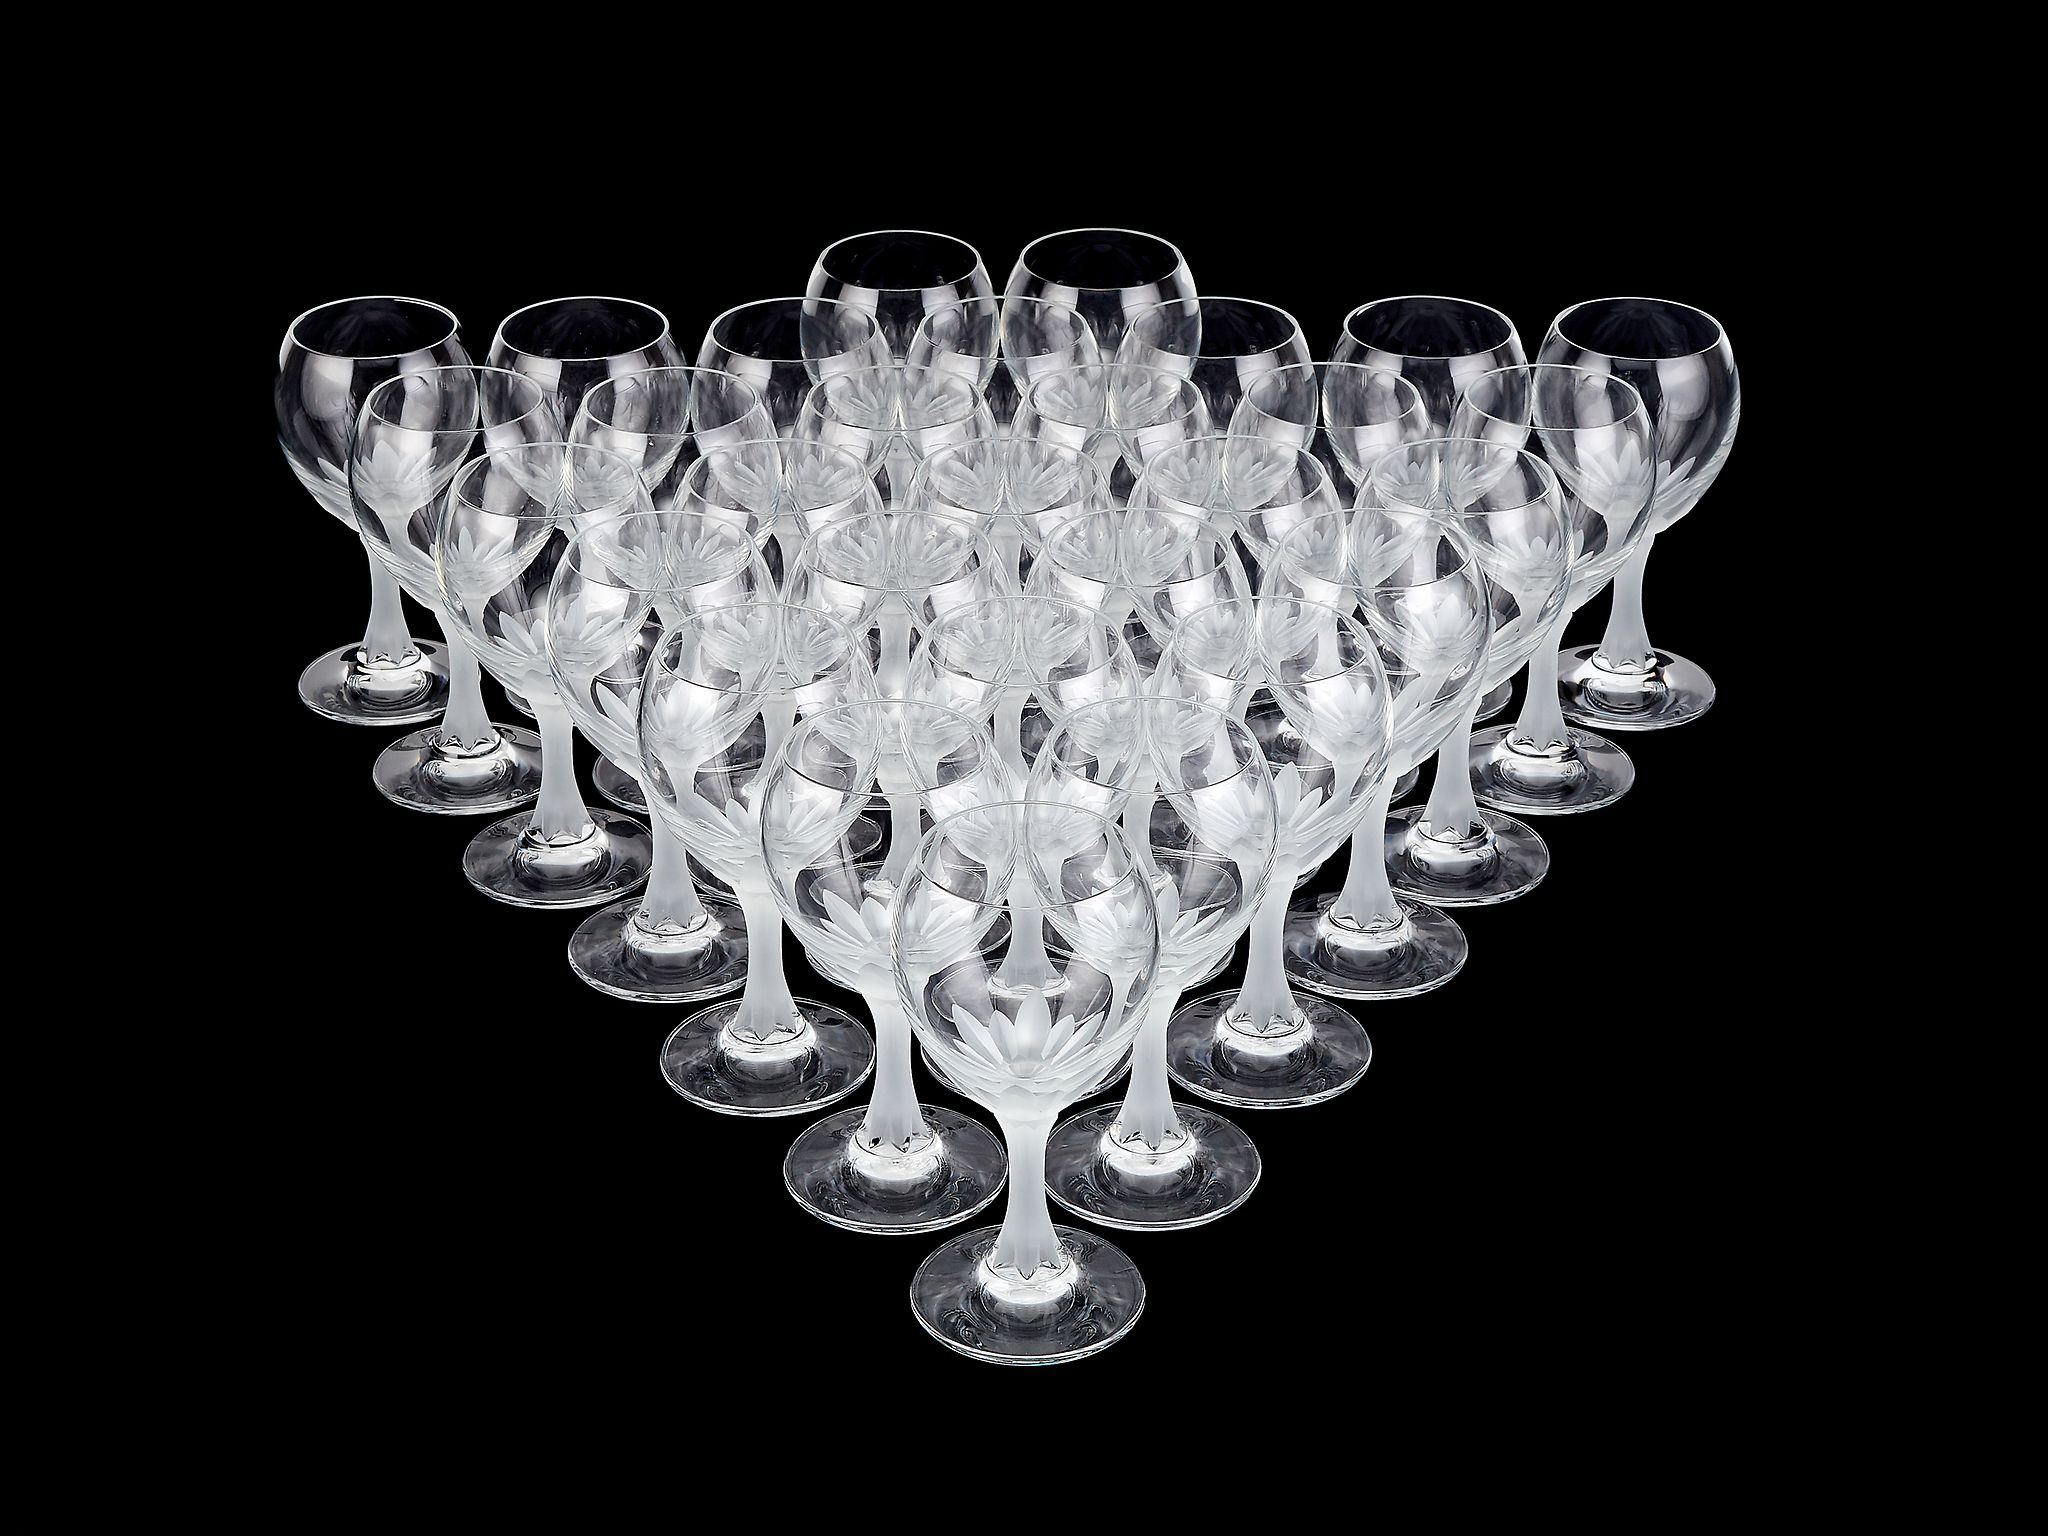 Thirty modern Bordeaux wine glasses retailed by Le Clos Wine & Spirit Dealers, with frosted stems,